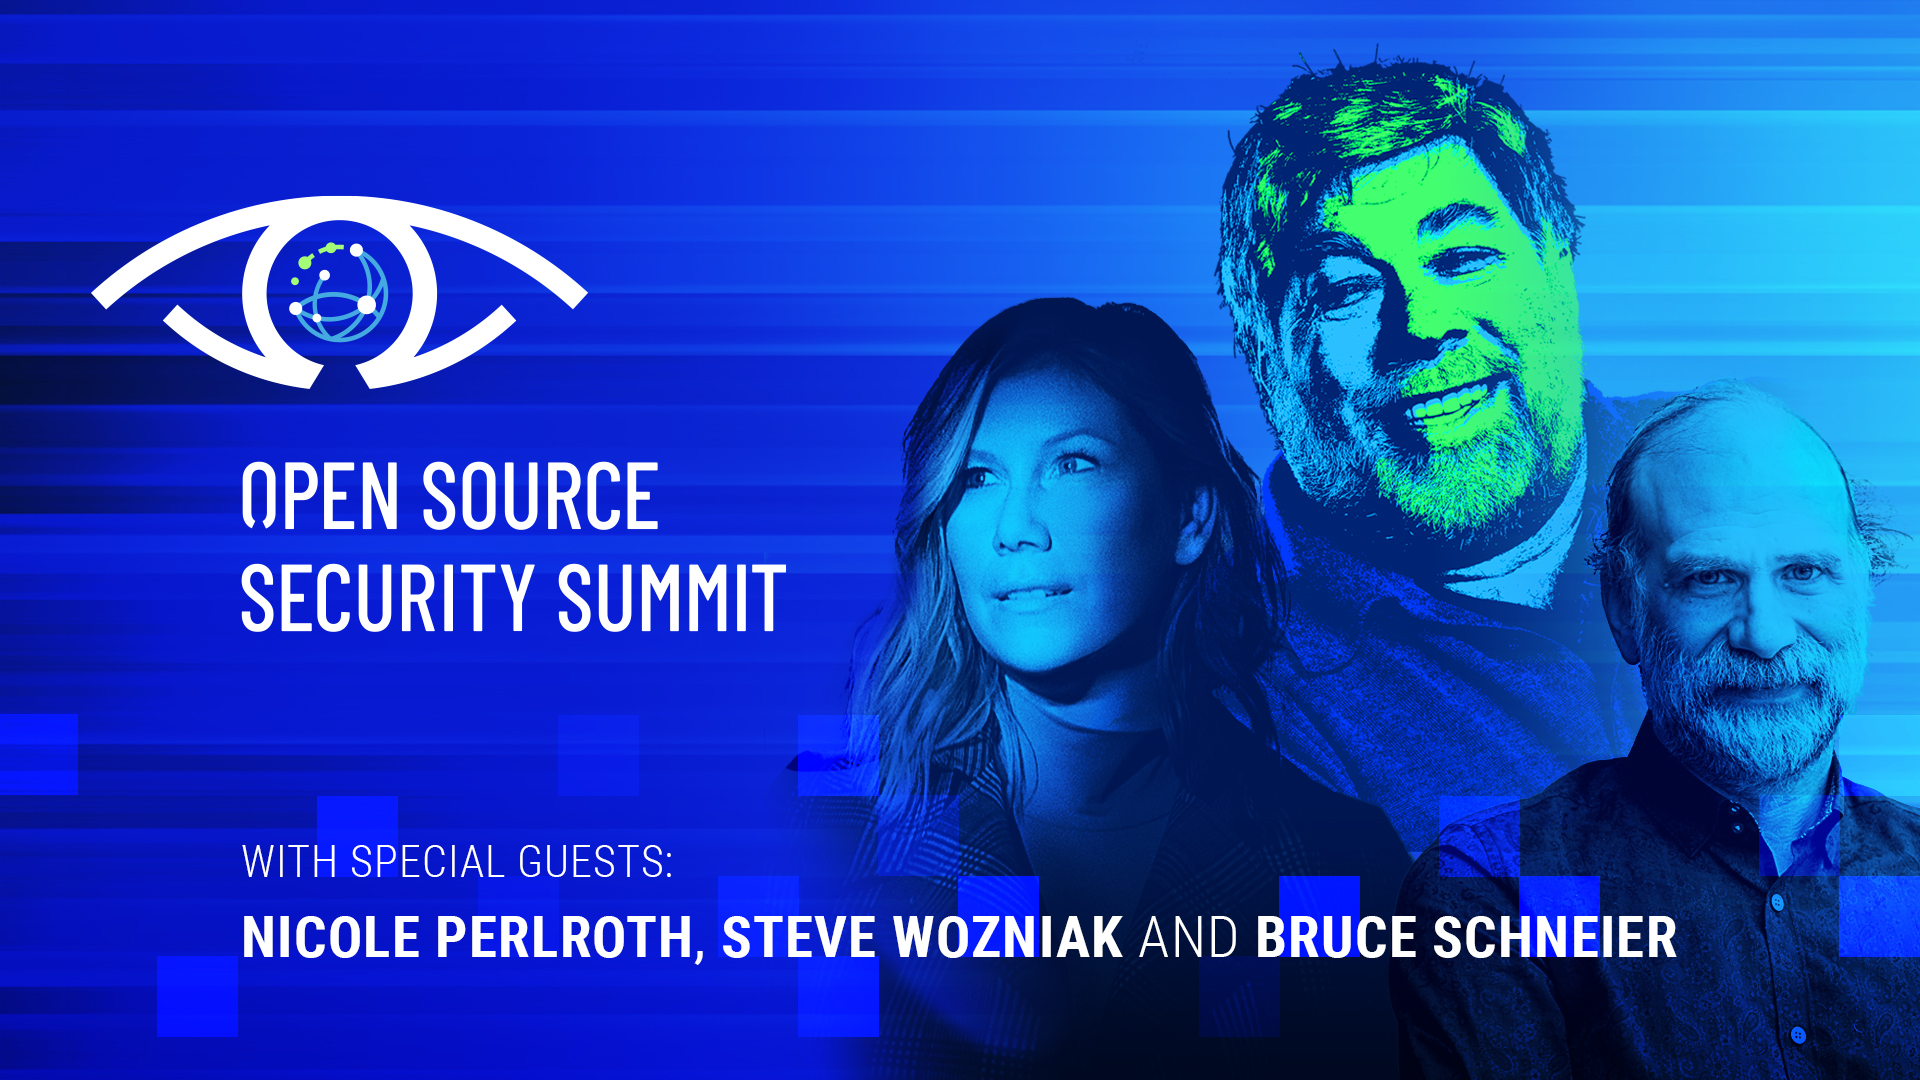 Open Source Security Summit 2021 - celebrity guests